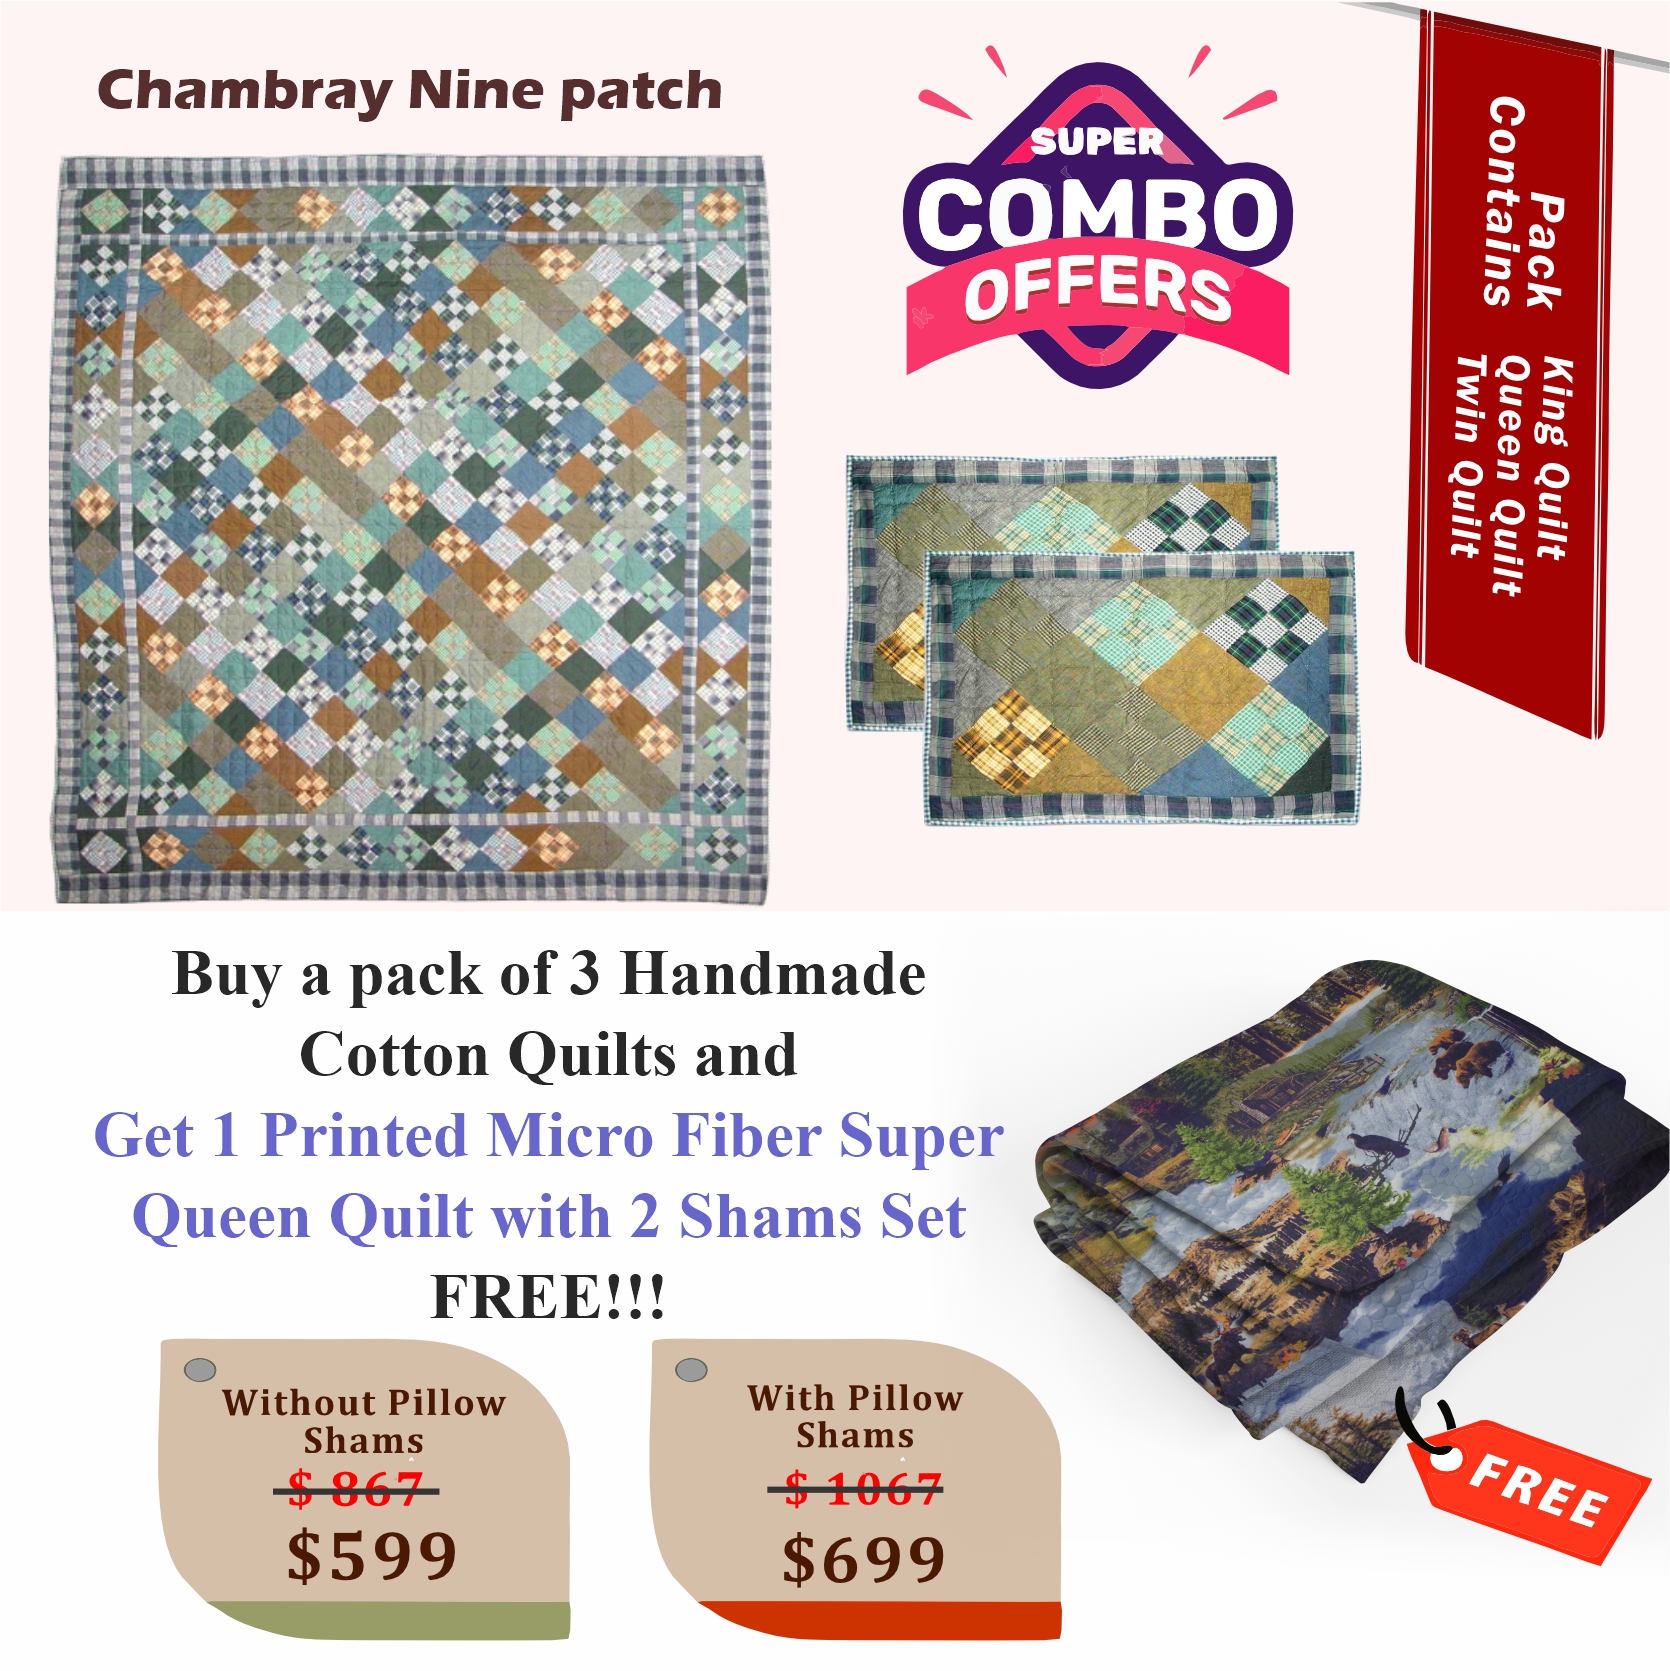 Spirit of Nine - Handmade Cotton quilts |  Buy 3 cotton quilts and get 1 Printed Microfiber Super Queen Quilt with 2 Shams set FREE